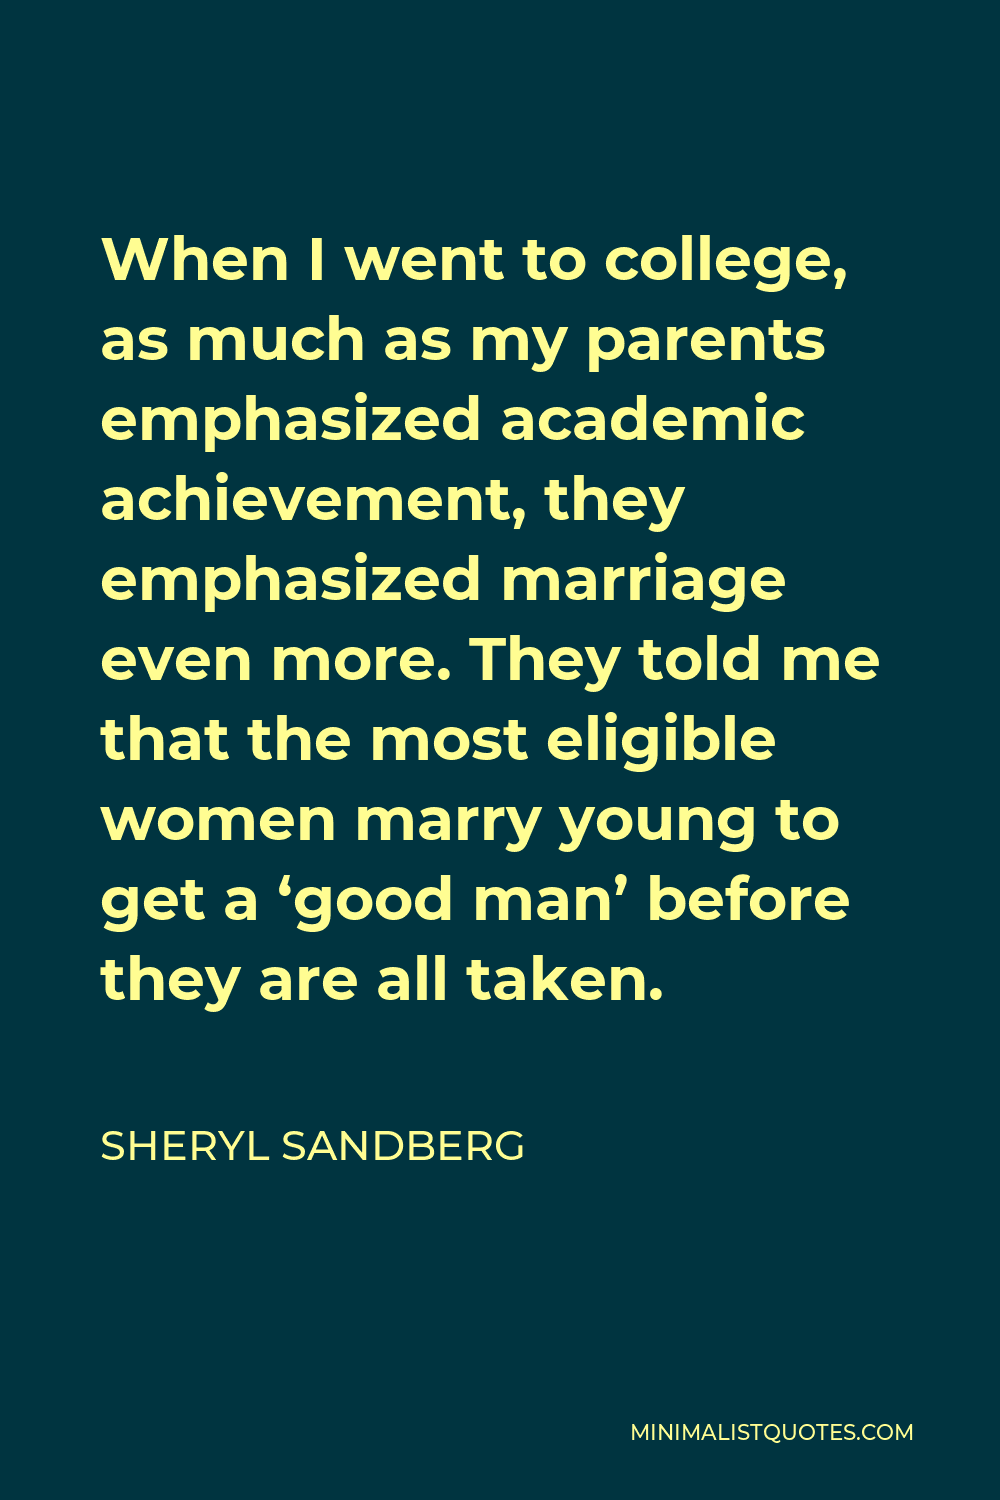 Sheryl Sandberg Quote - When I went to college, as much as my parents emphasized academic achievement, they emphasized marriage even more. They told me that the most eligible women marry young to get a ‘good man’ before they are all taken.